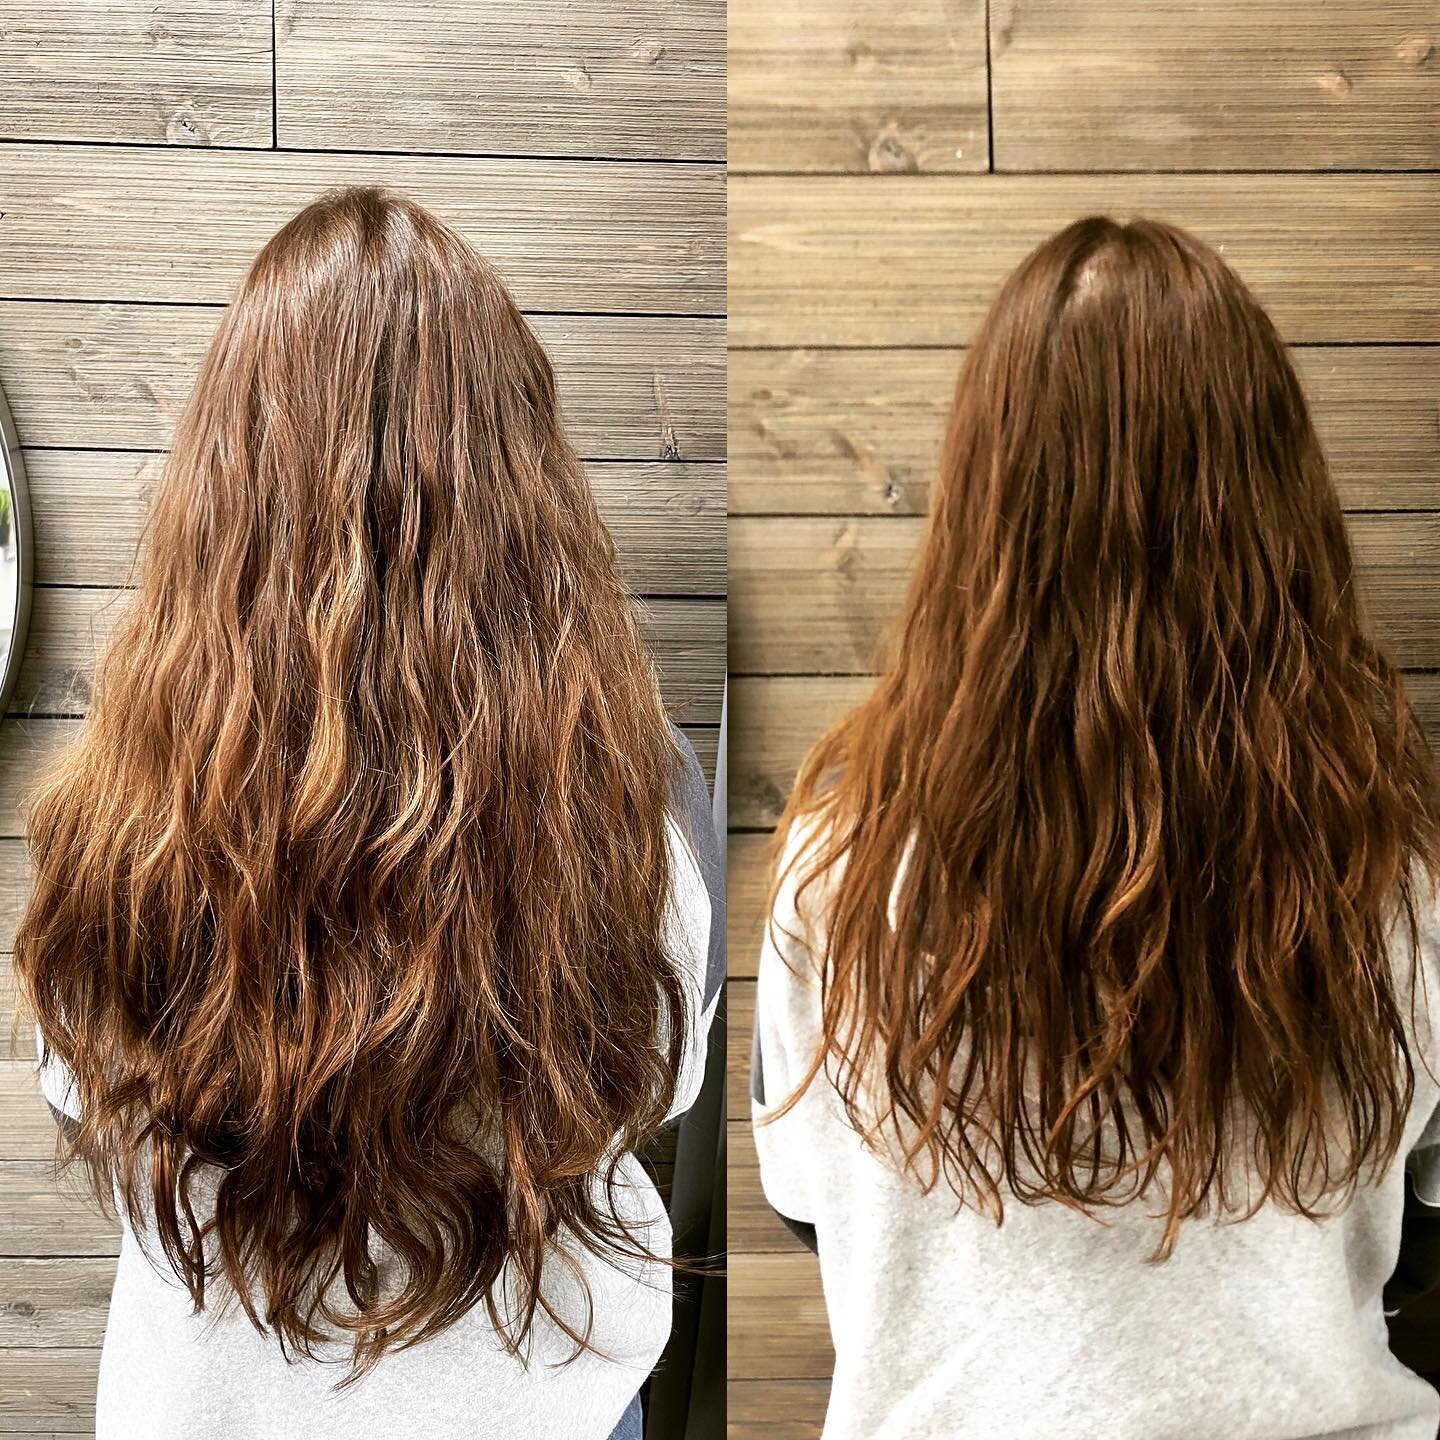 Before on RIGHT. After on LEFT! Extensions add length and volume in only a couple hours! #bellamihairextensions #bellamihair #volumeweftextensions #scottsdalehairstylist #weddinghairprepping #thickhair #longhair